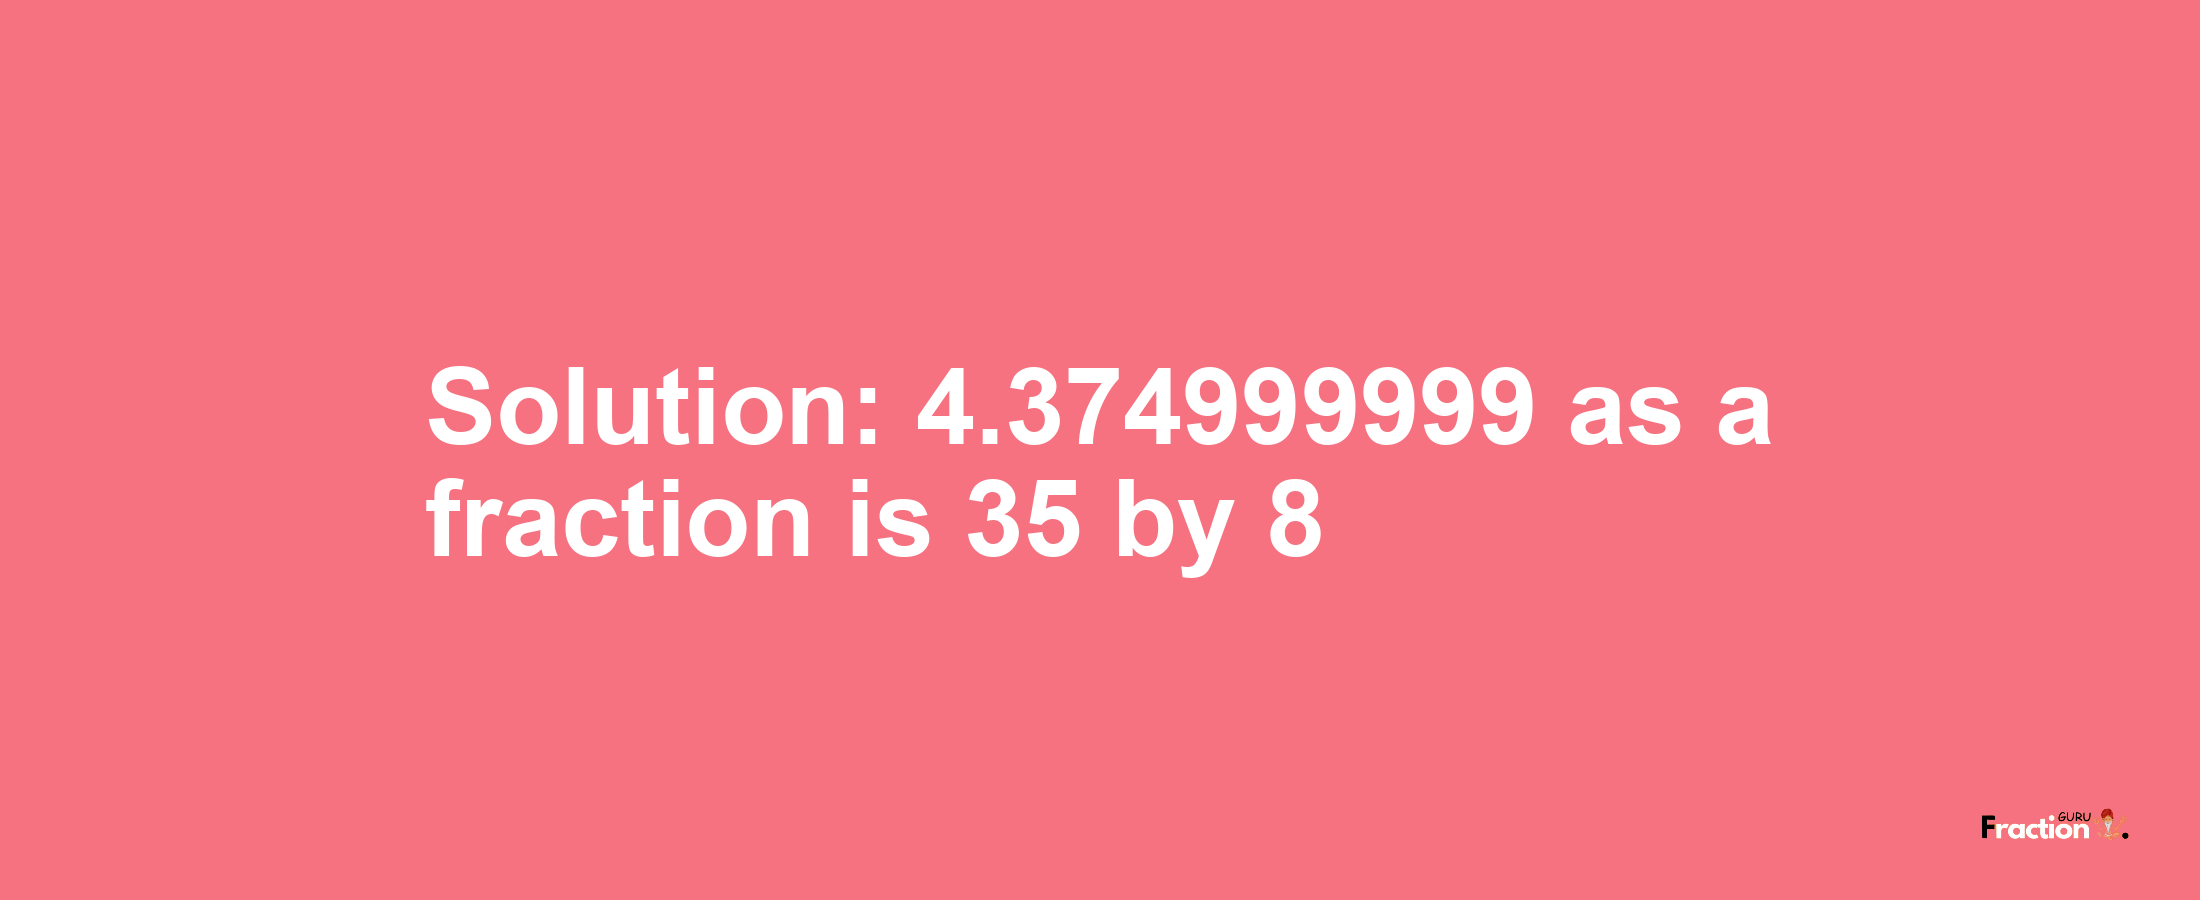 Solution:4.374999999 as a fraction is 35/8